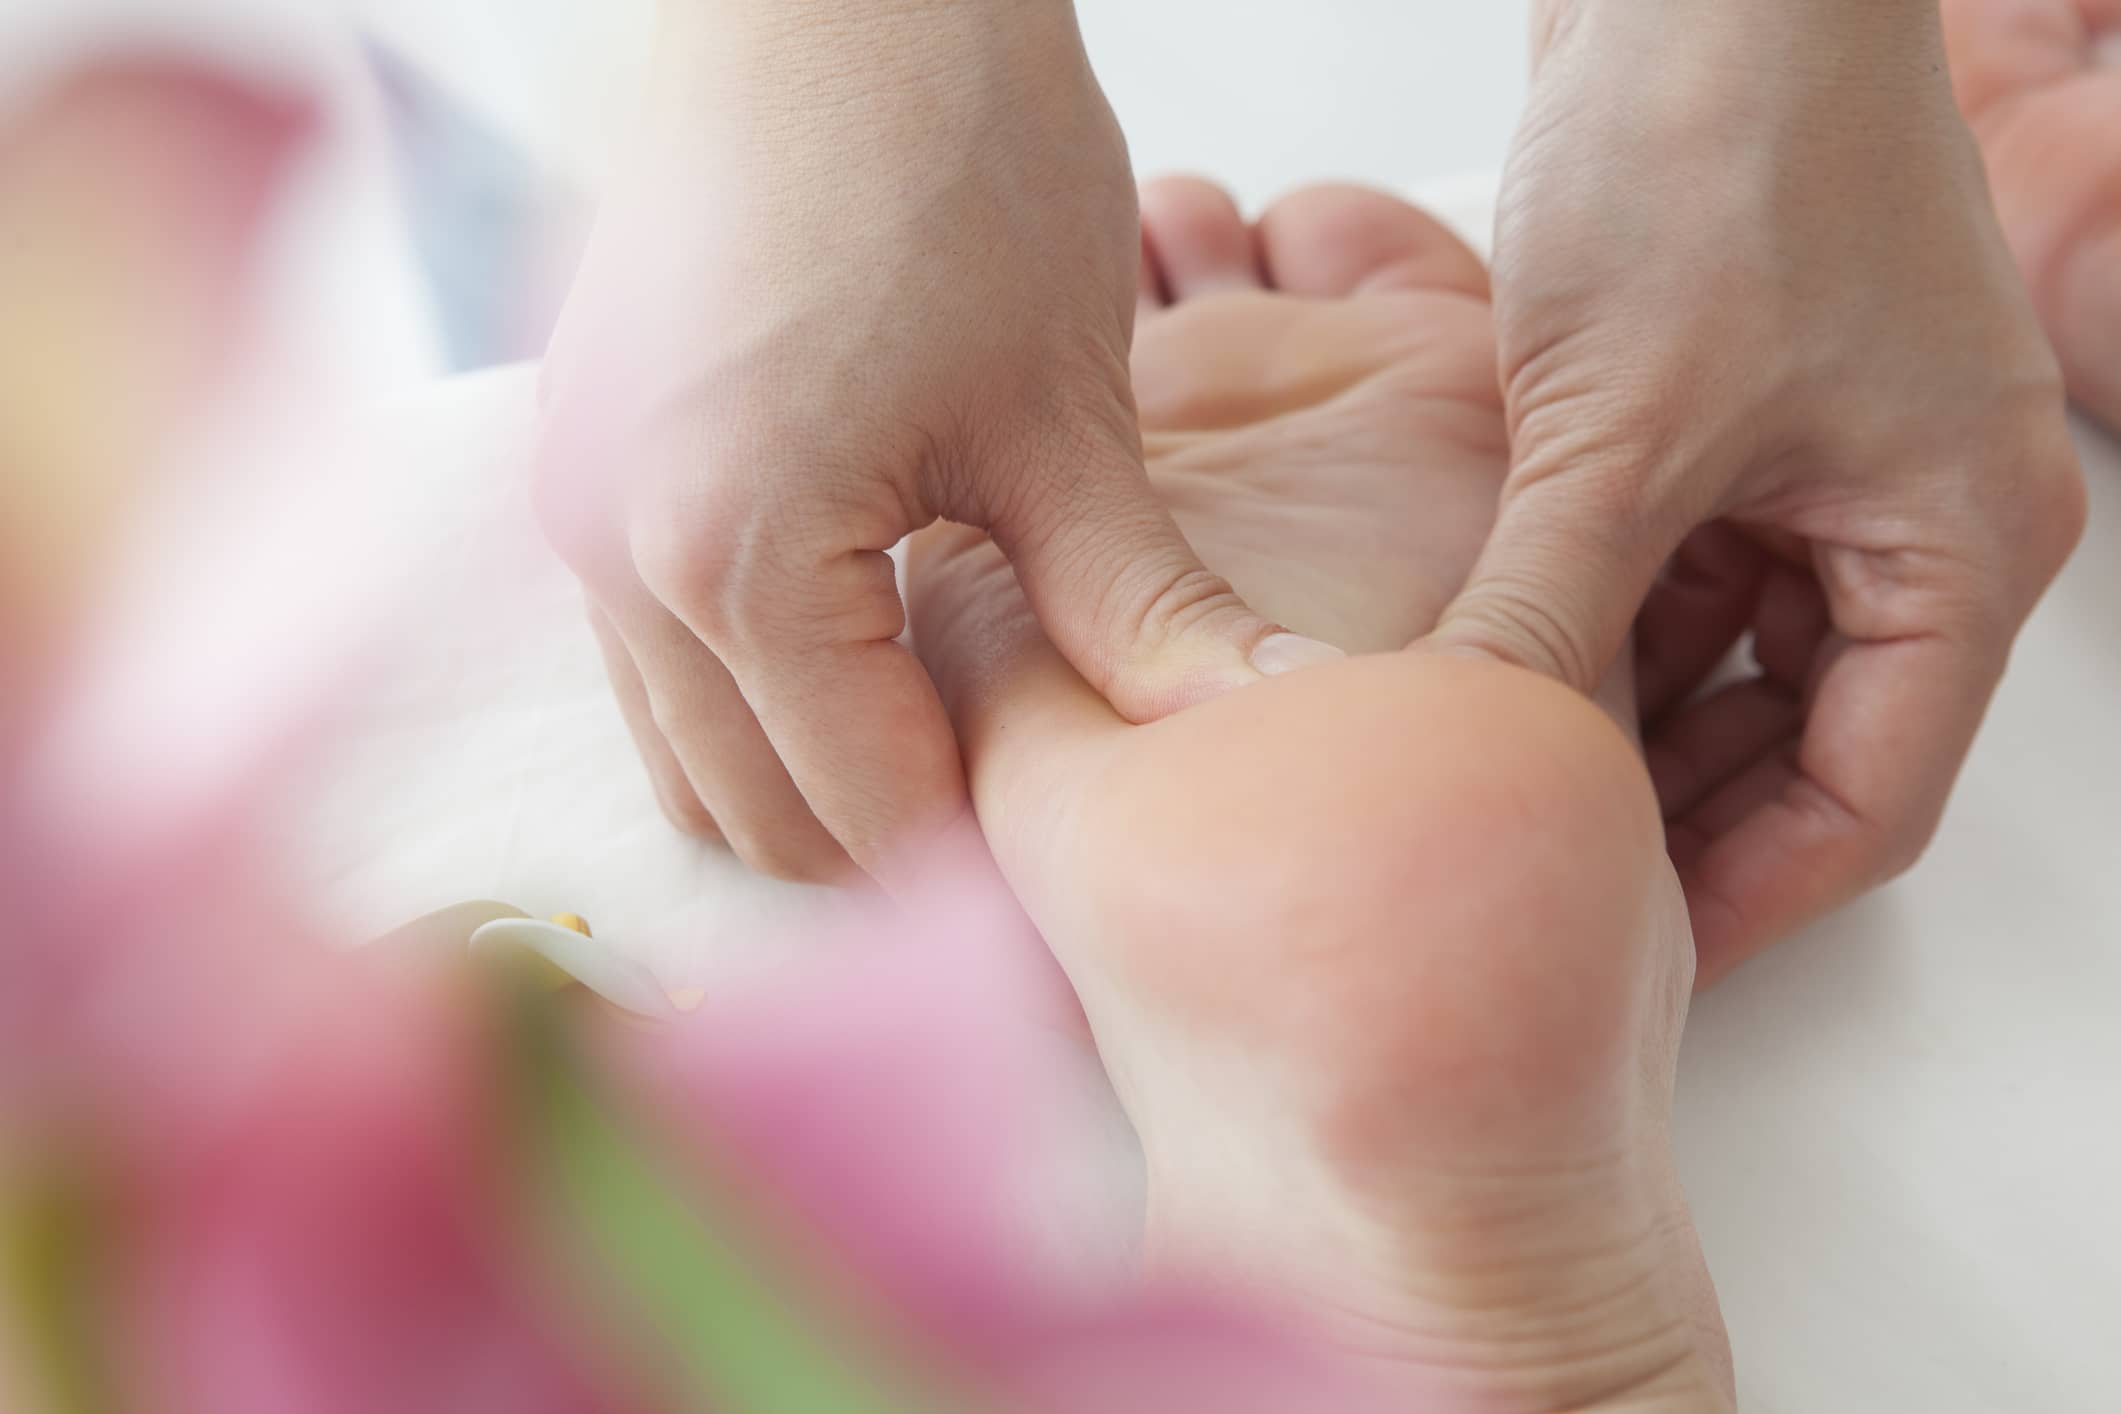 Essential oils used in foot reflexology and zone therapy